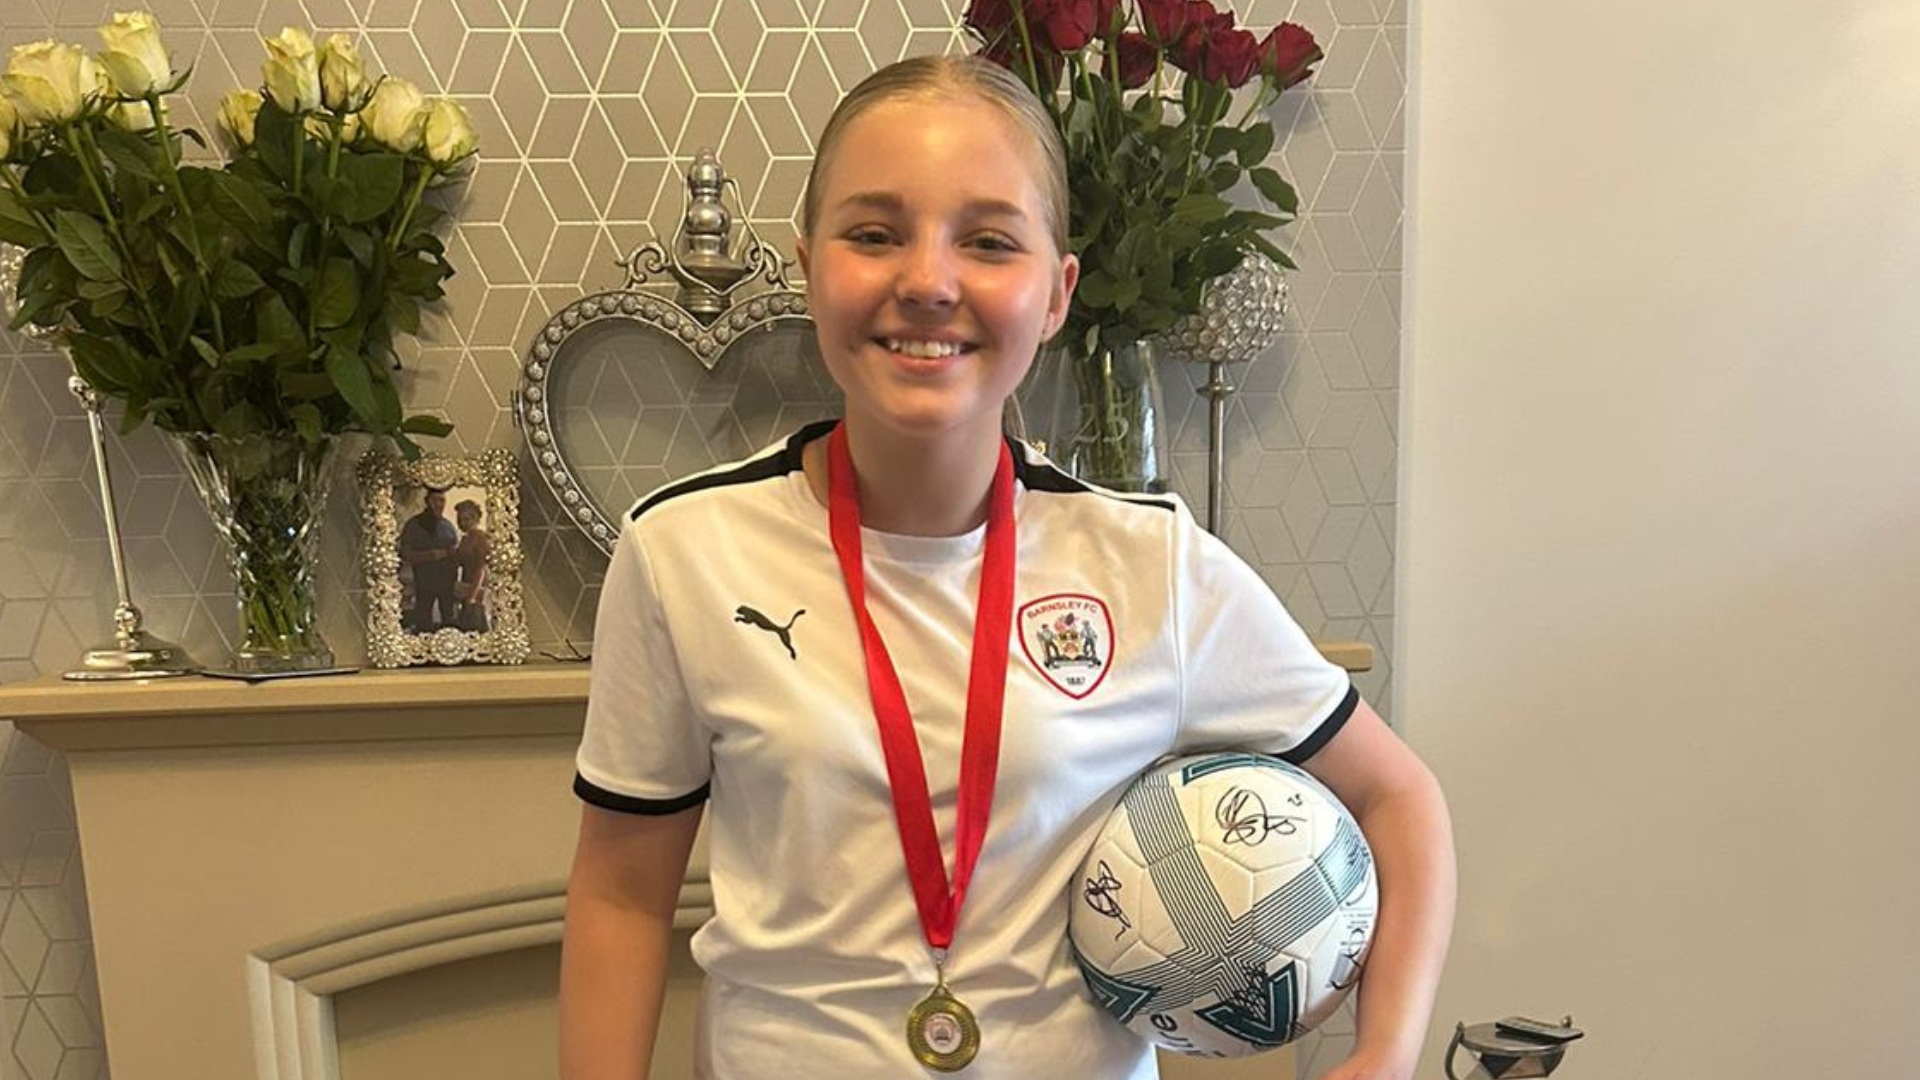 Taylor is heading to Wembley courtesy of The EFL, RitC and Barnsley FC